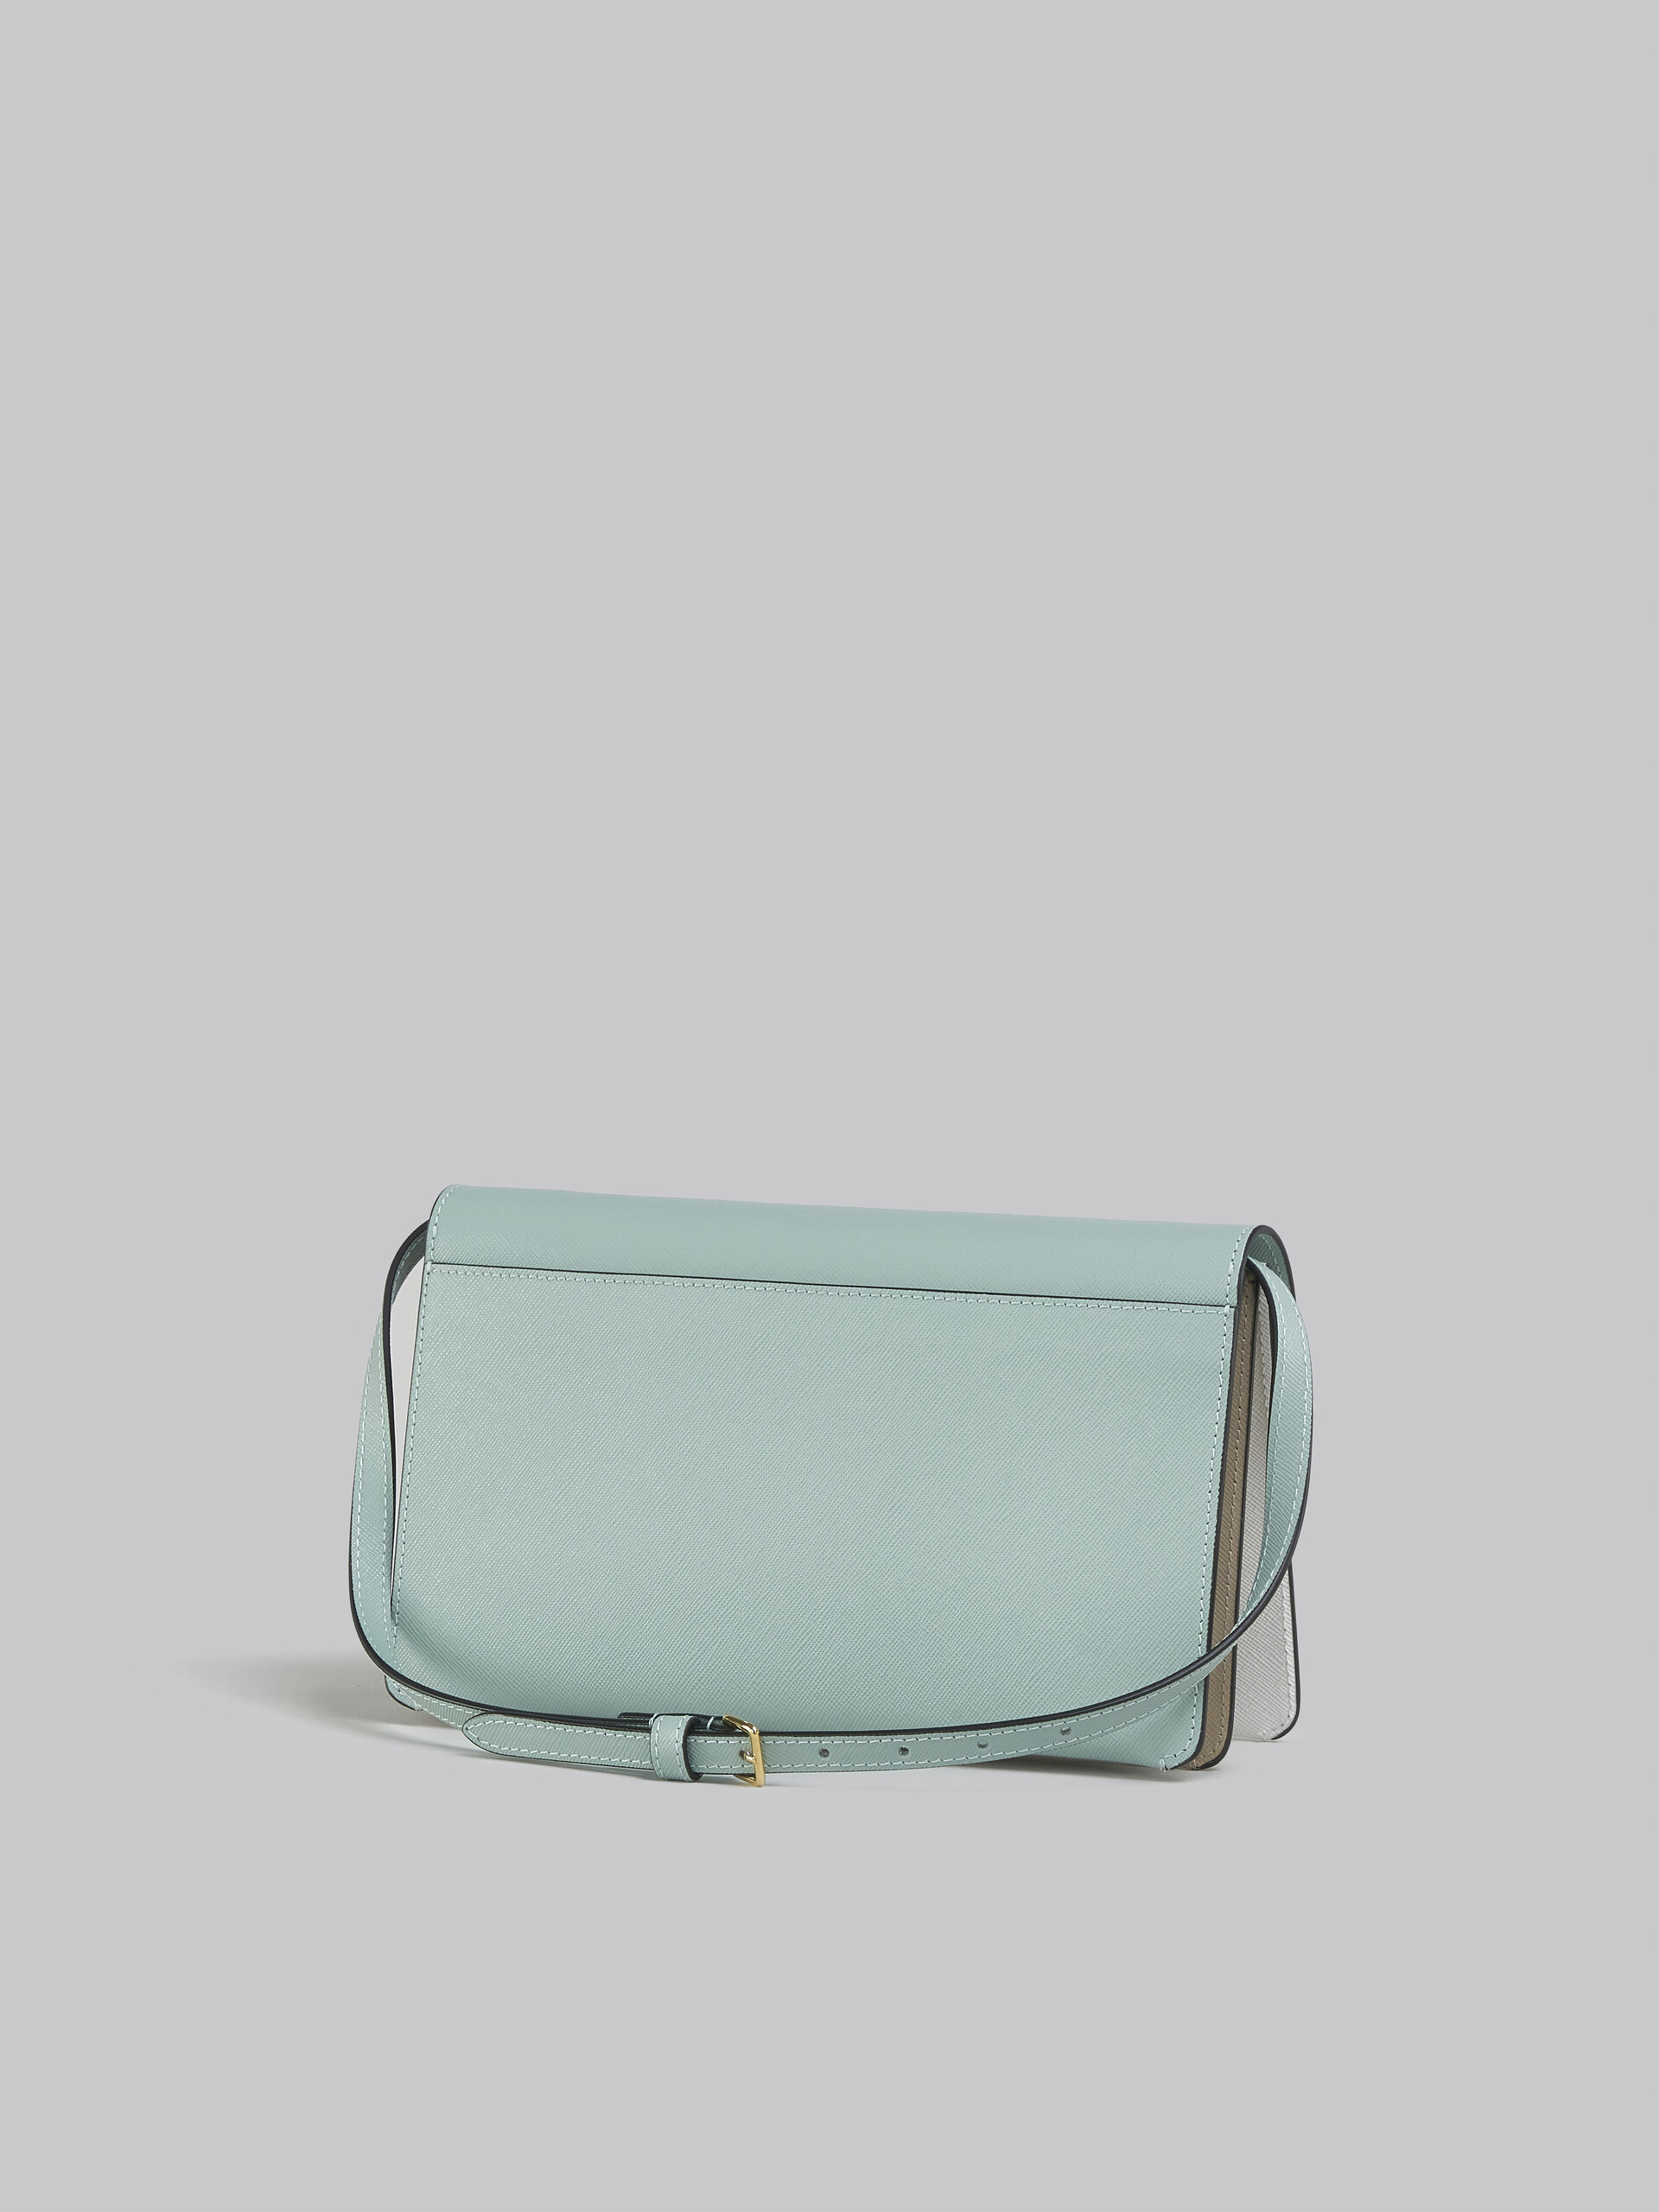 Trunk Clutch in light green white and brown saffiano leather - Pochettes - Image 3